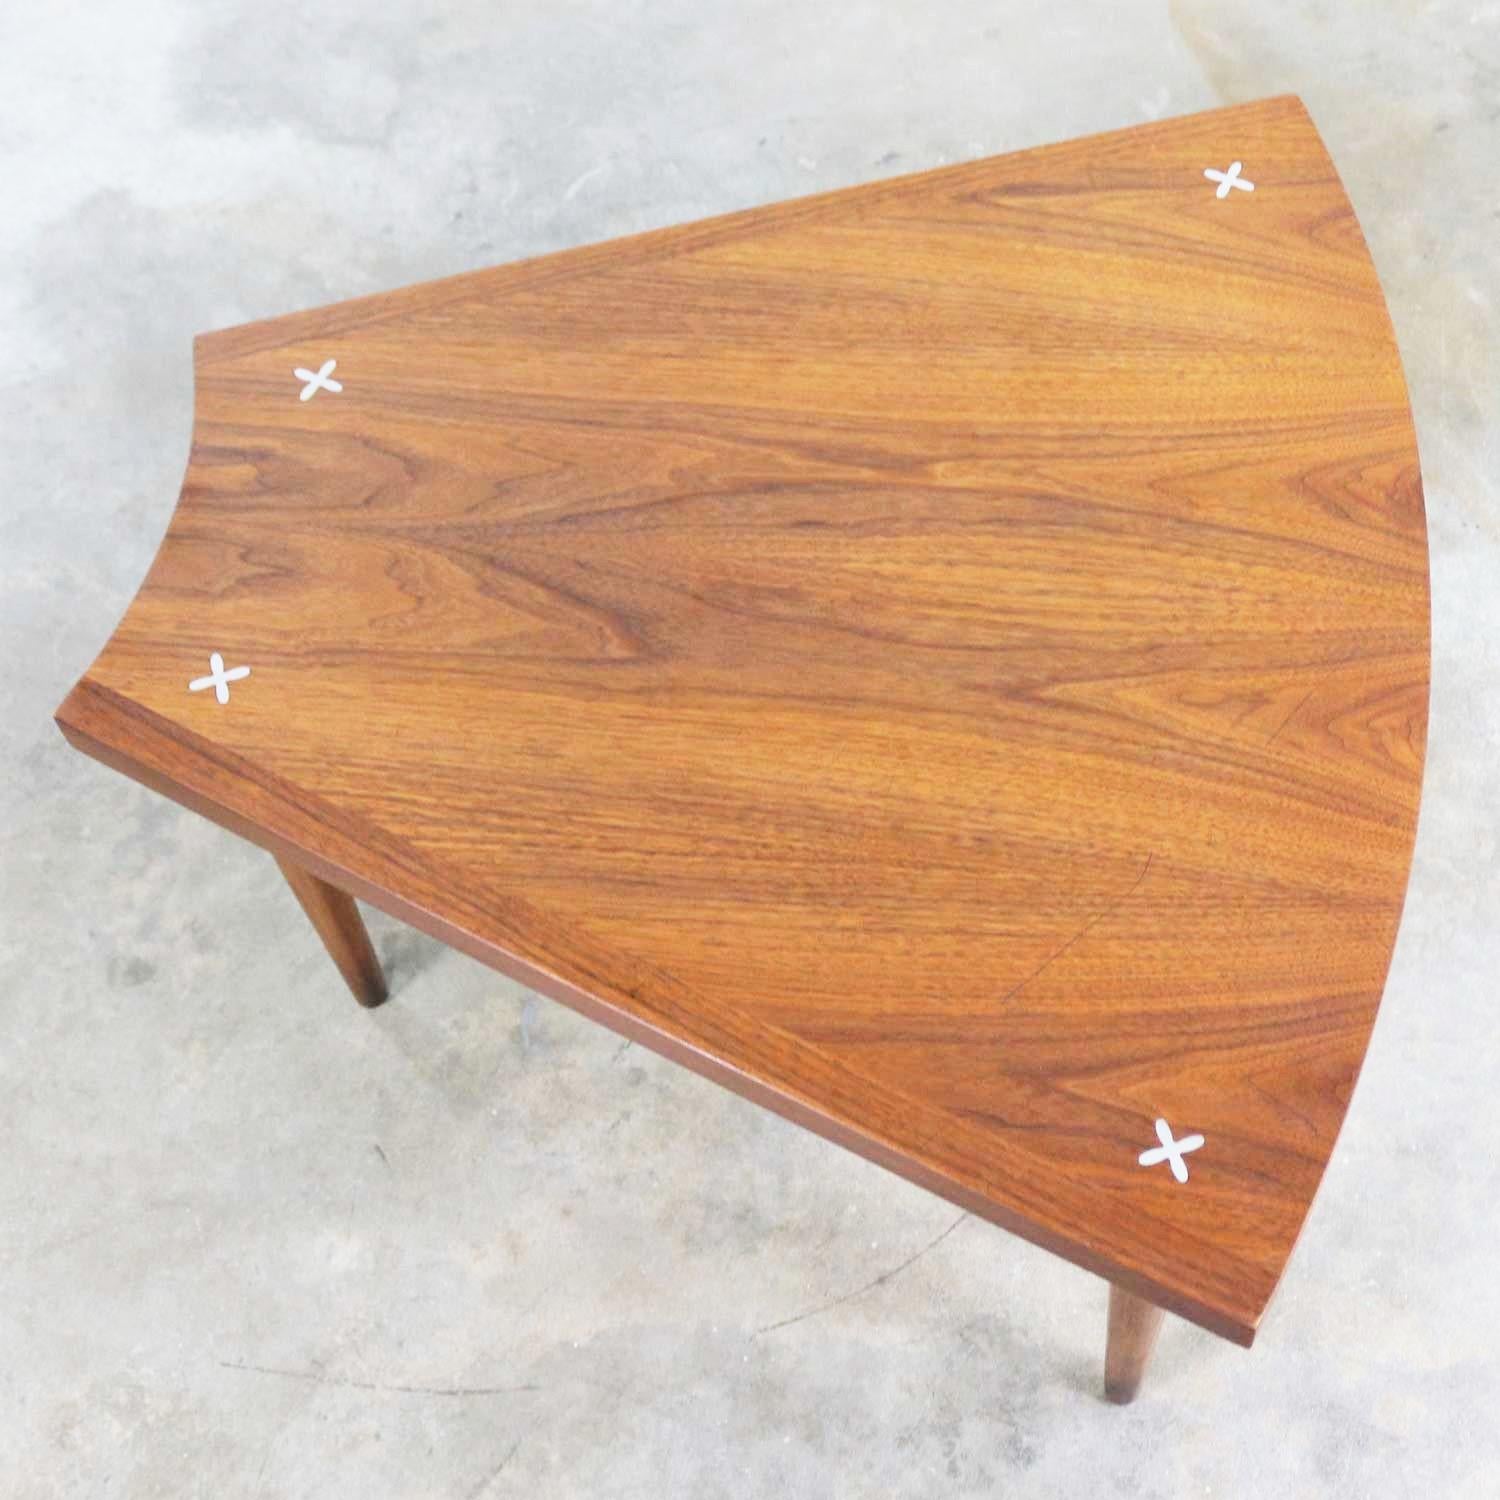 Walnut Wedge Shape End Table Attributed to Merton Gershun for American of Martin 1